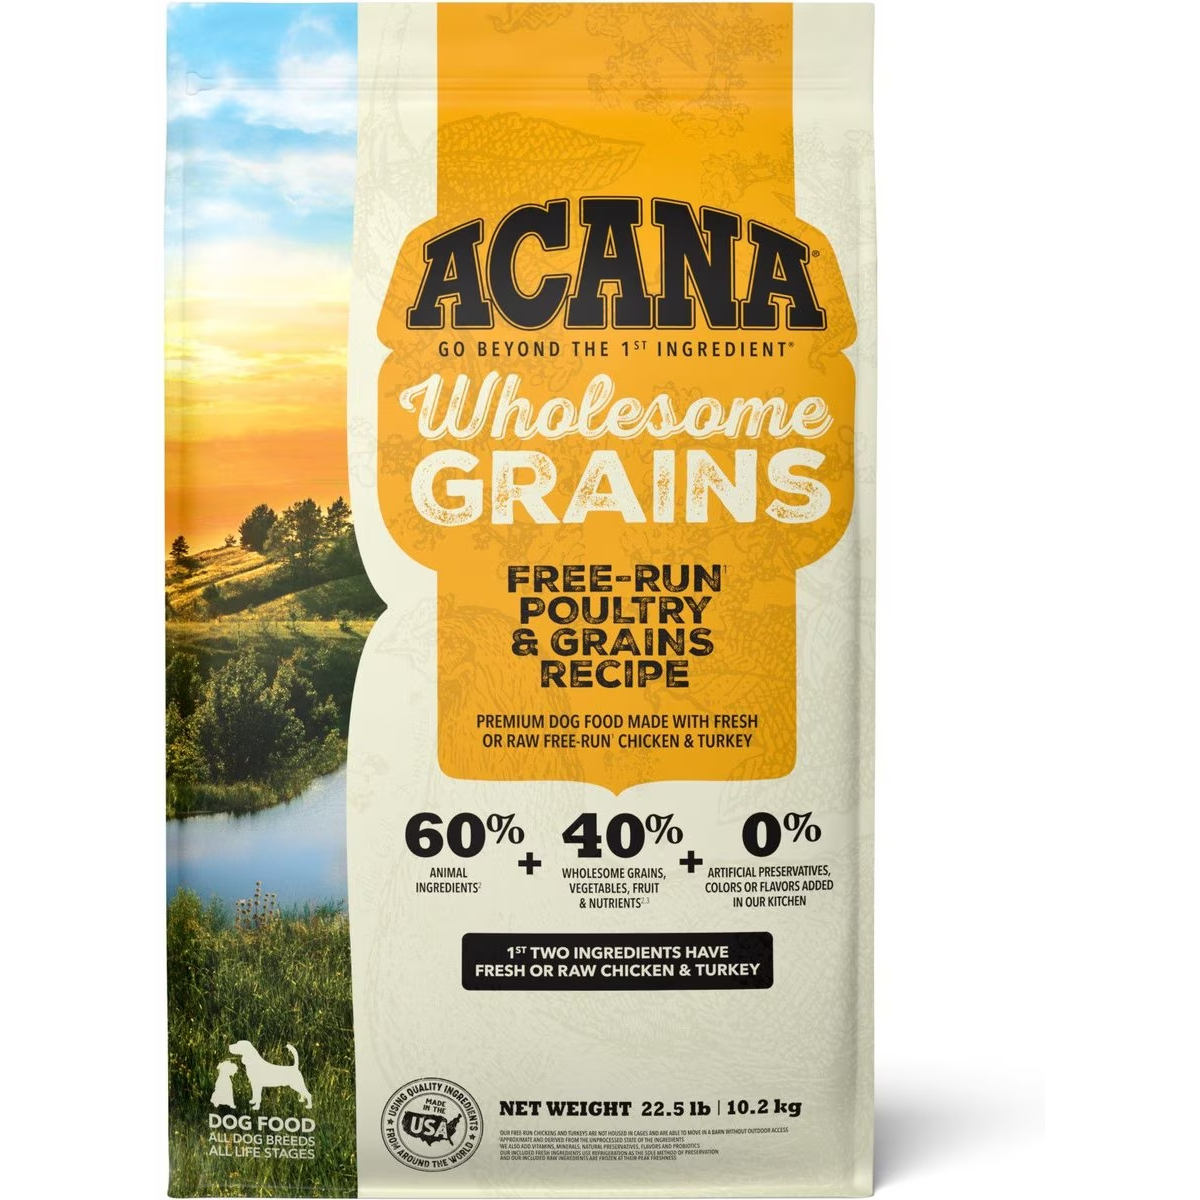 ACANA + Wholesome Grains Gluten-Free Dry Dog Food 